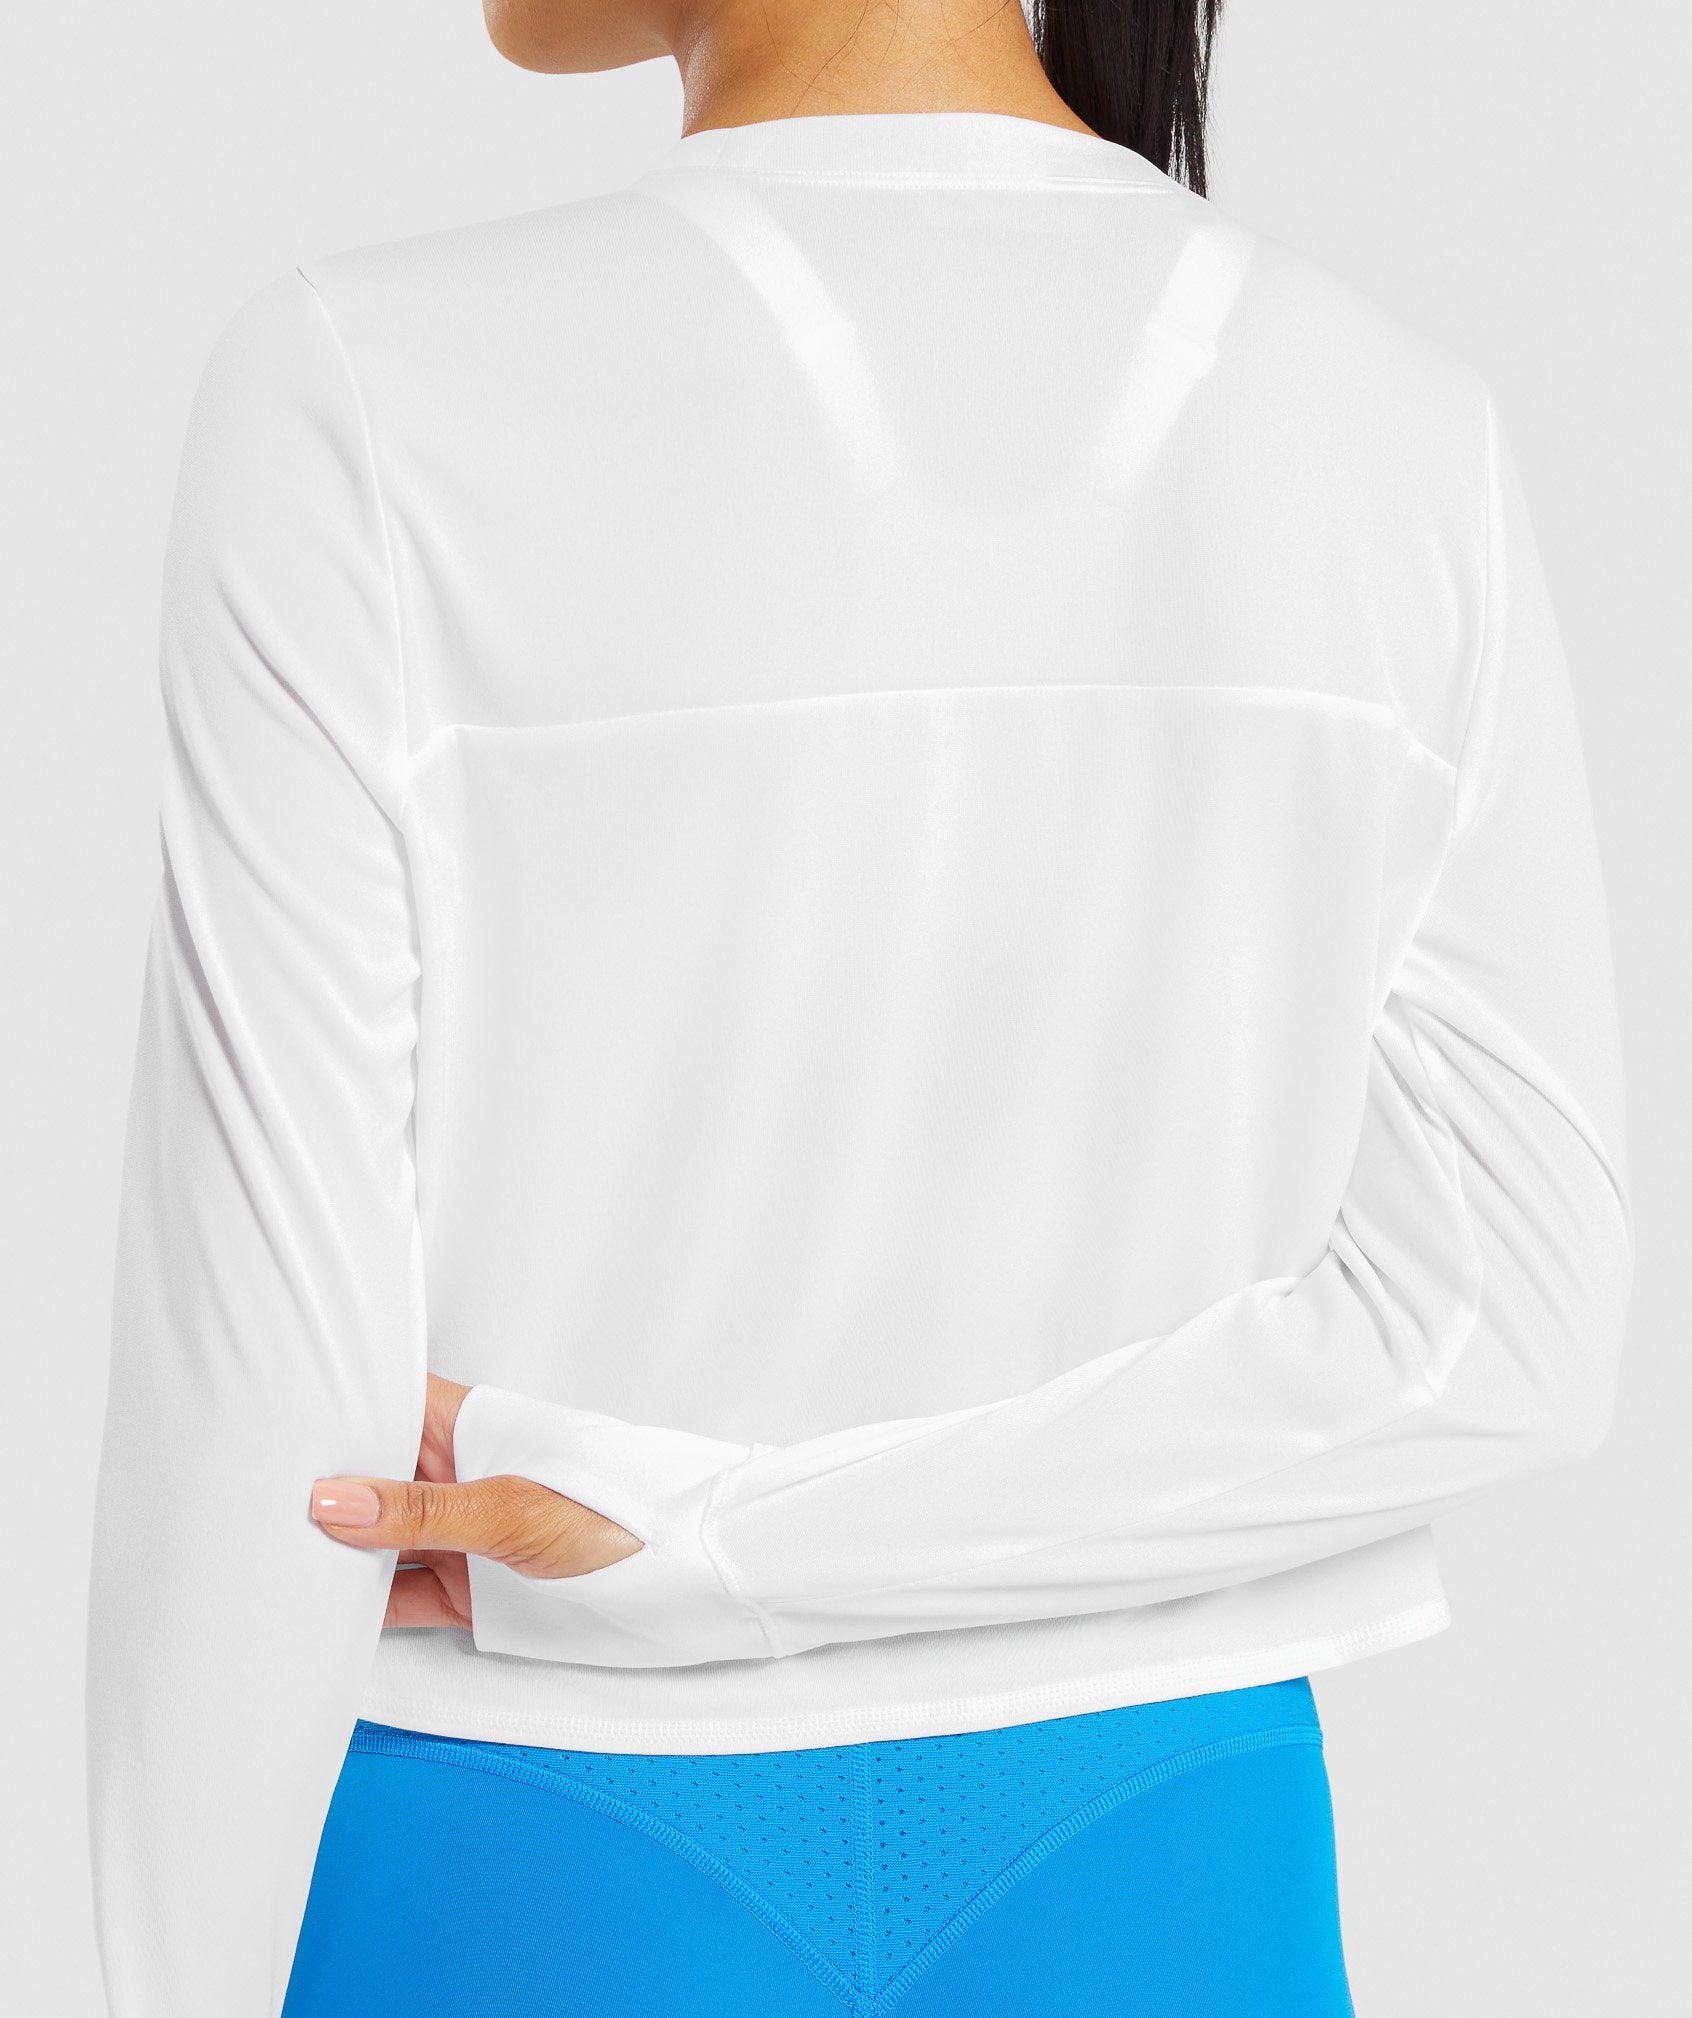 Pulse Long Sleeve Top in White